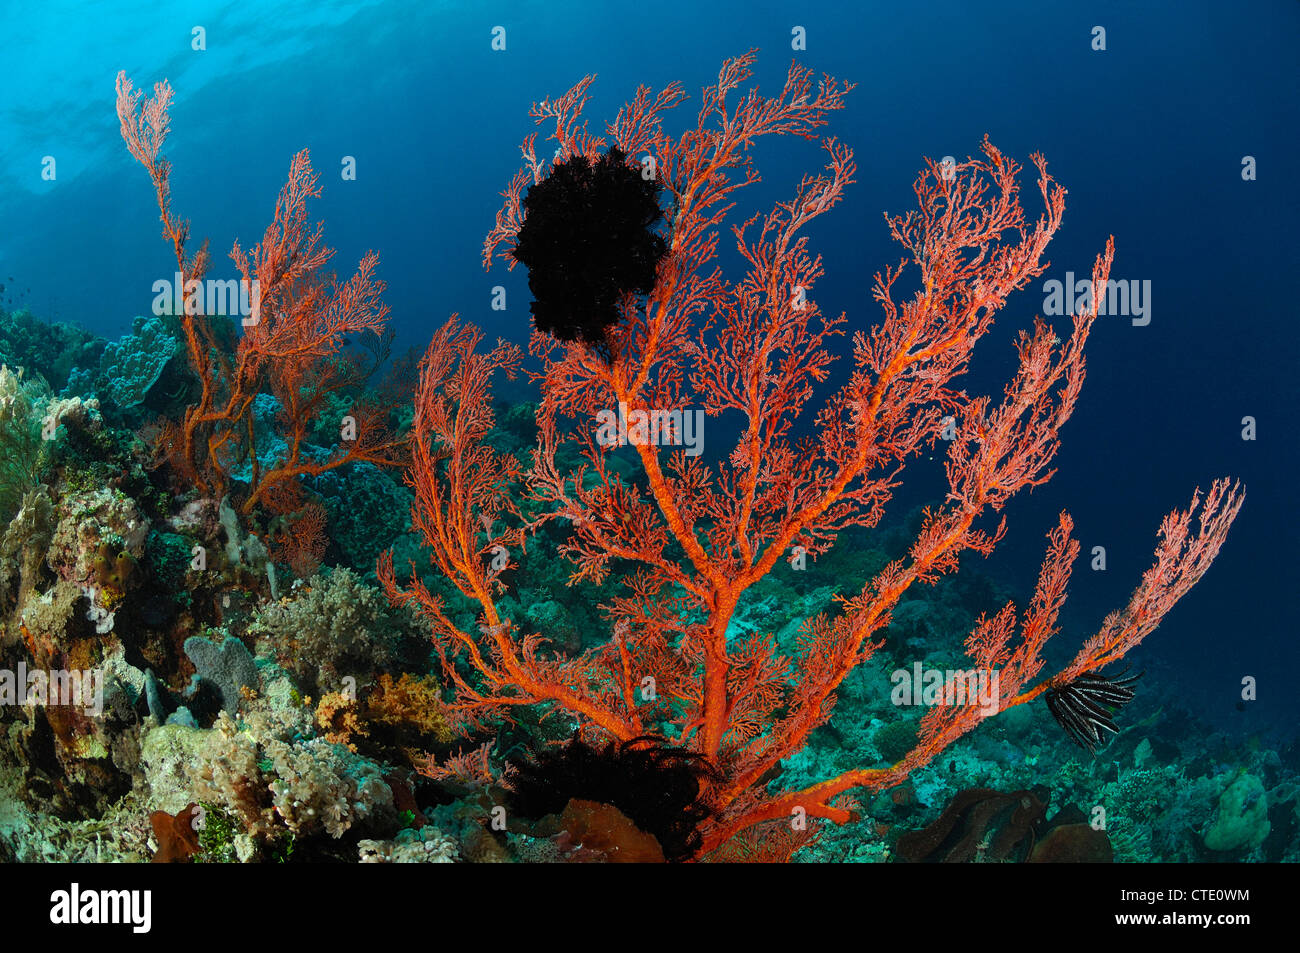 Seafan in Coral Reef, Melithaea sp., Bunaken, Nord Sulawesi, Indonesia Foto Stock